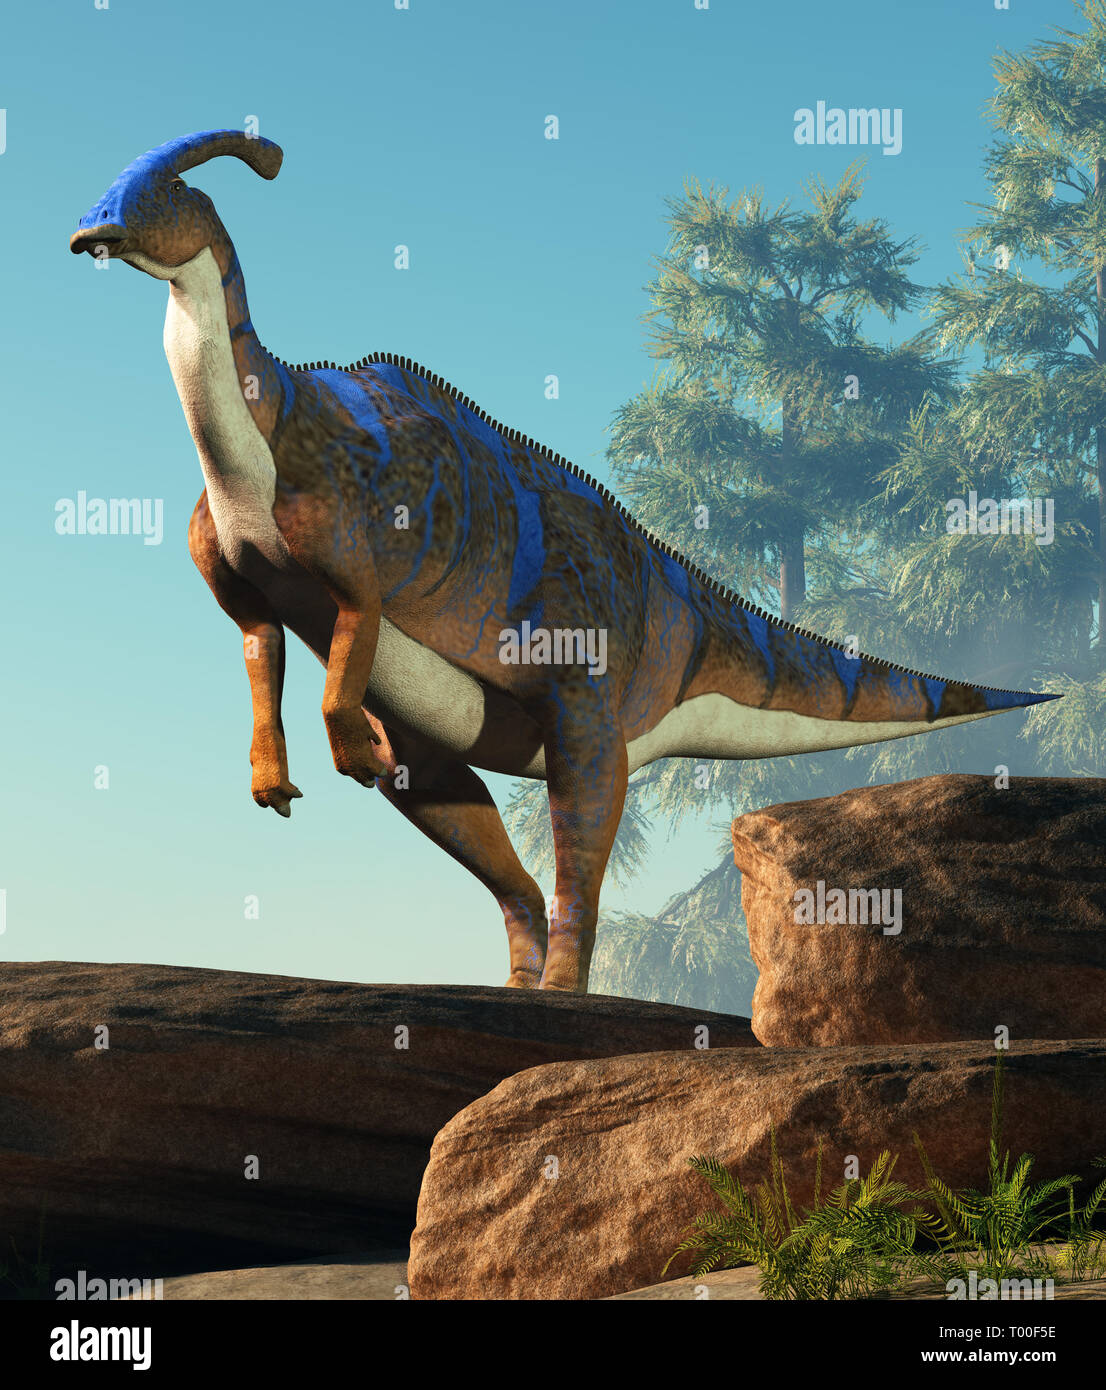 A parasaurolophus, a type of herbivorous ornithopod dinosaur of the hadrosaur family stands on two legs.  This prehistoric animal is on a rocky cliff. Stock Photo